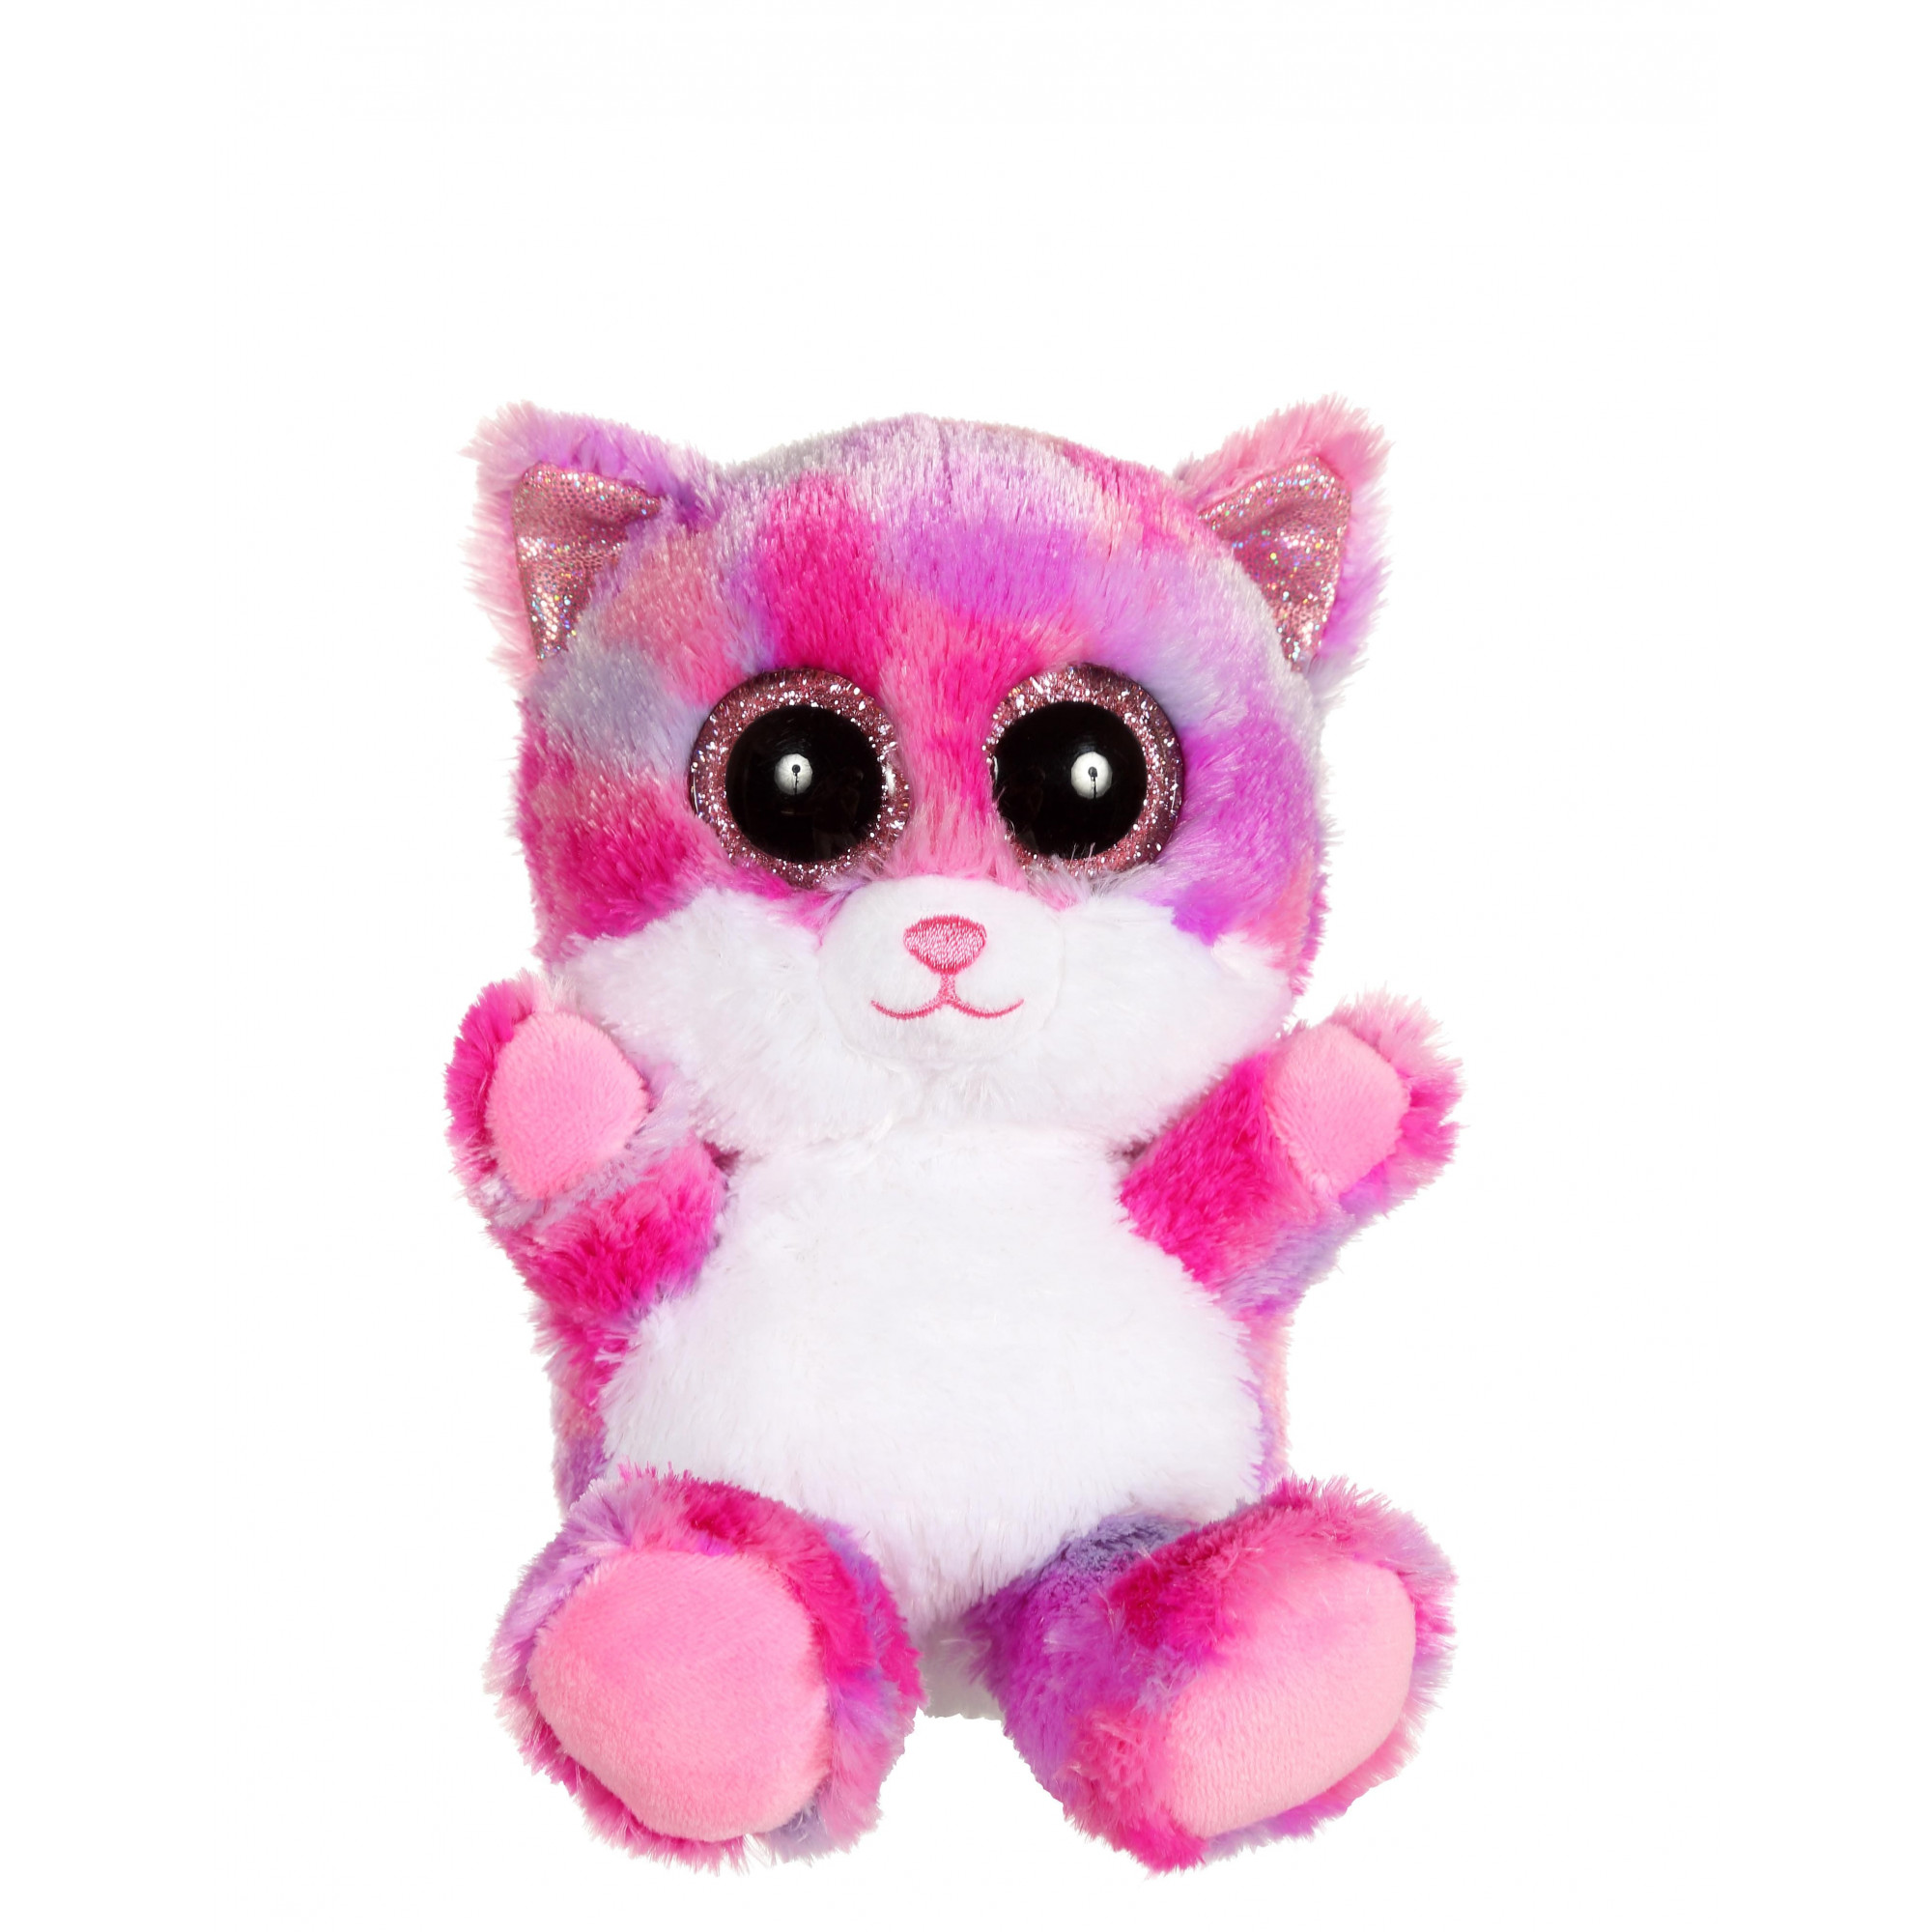 Liloo - Brilloo Friends purple and pink cat 13 cm